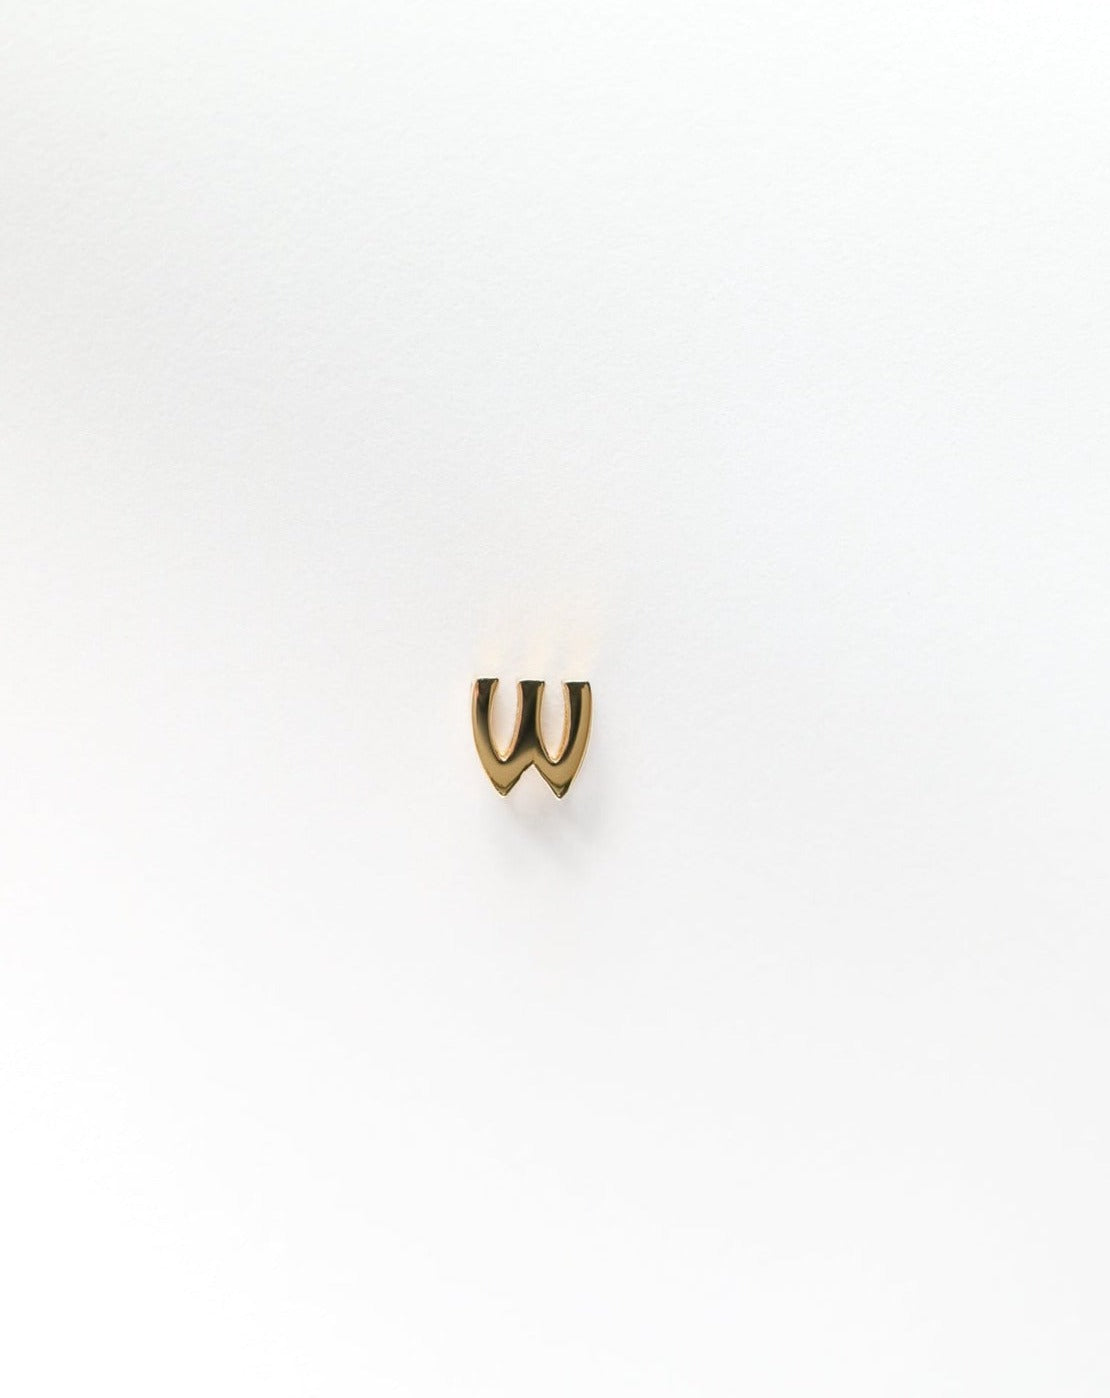 W initial charm letter pendant in 14kt gold